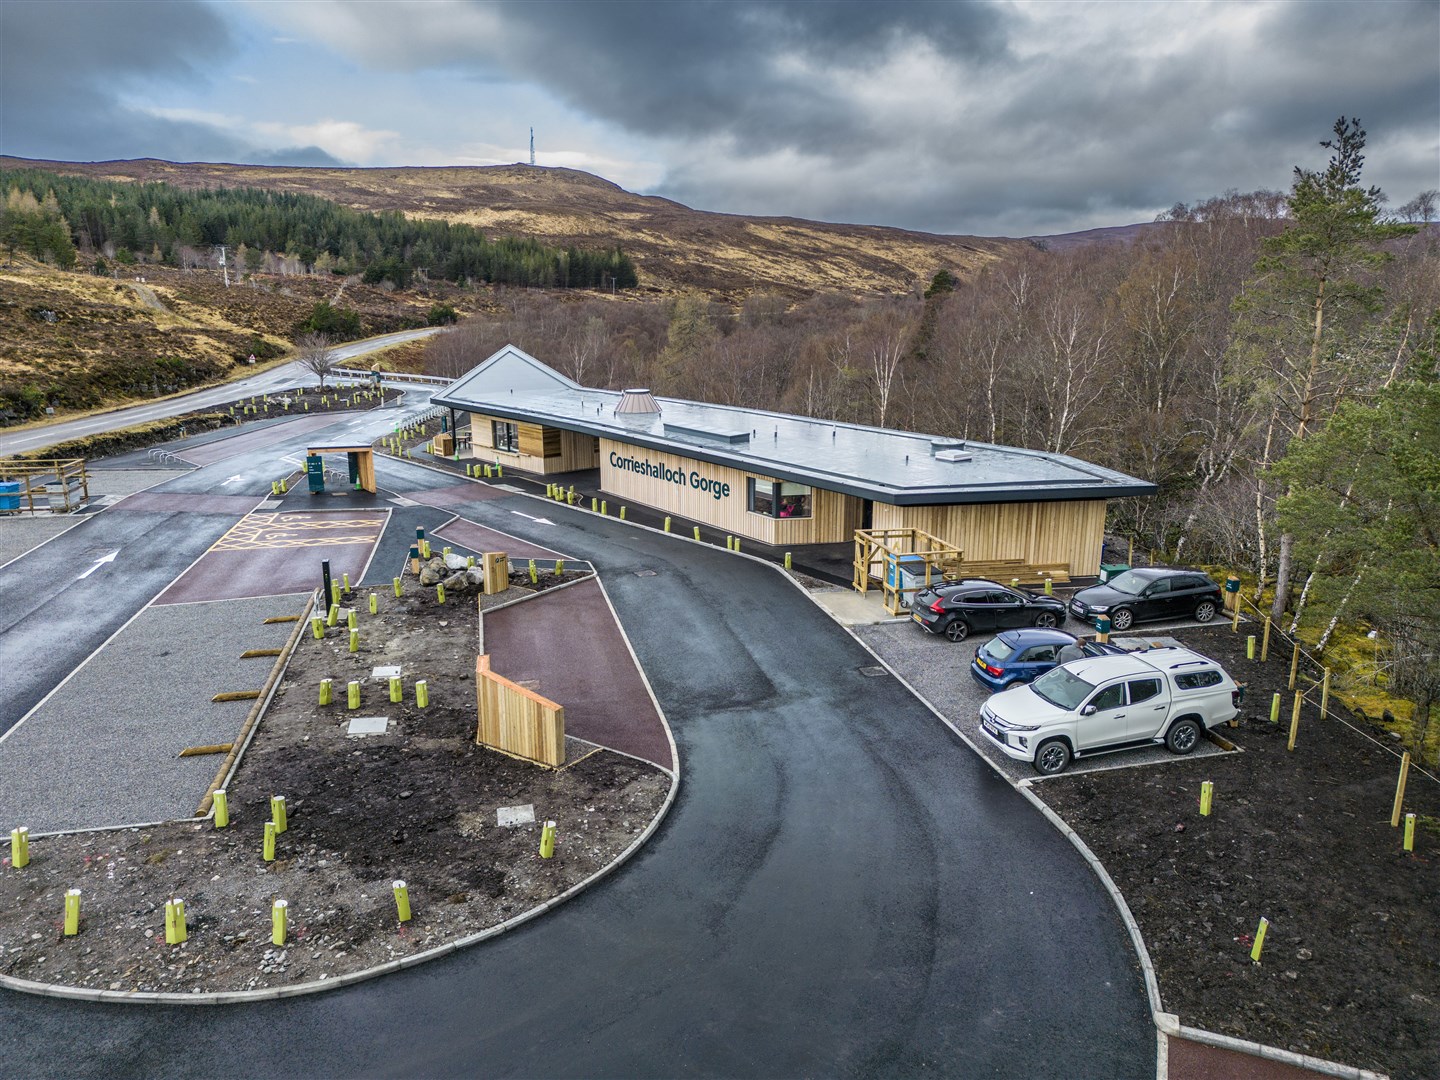 Corrieshalloch Gorge Visitor Centre is run by the National Trust for Scotland. Piture: Peter Devlin